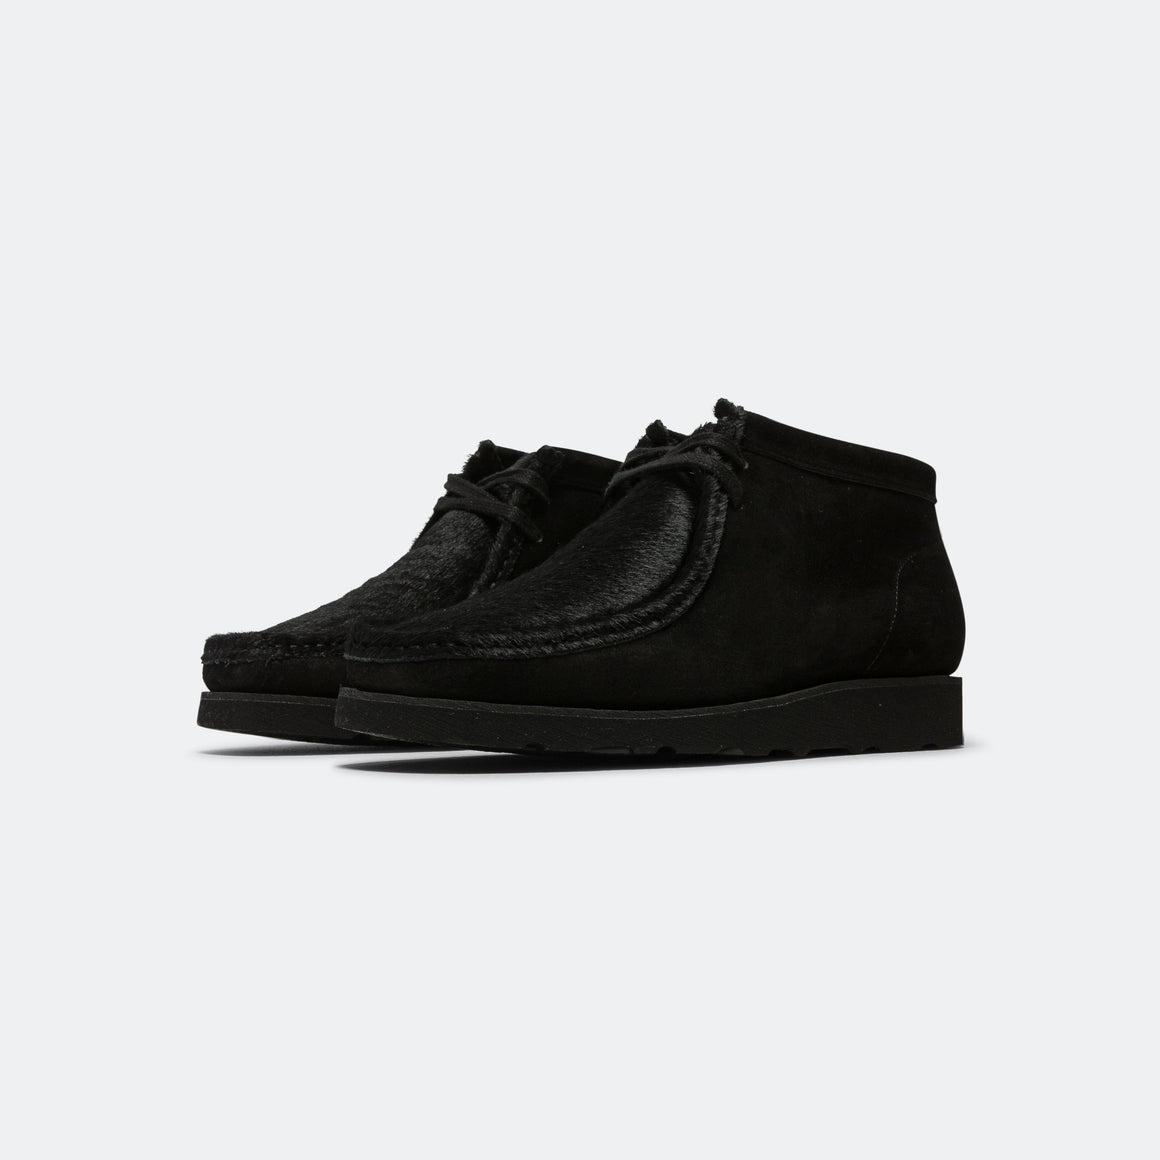 Padmore & Barnes - P404 × UP THERE - Black Suede/Black Pony - UP THERE